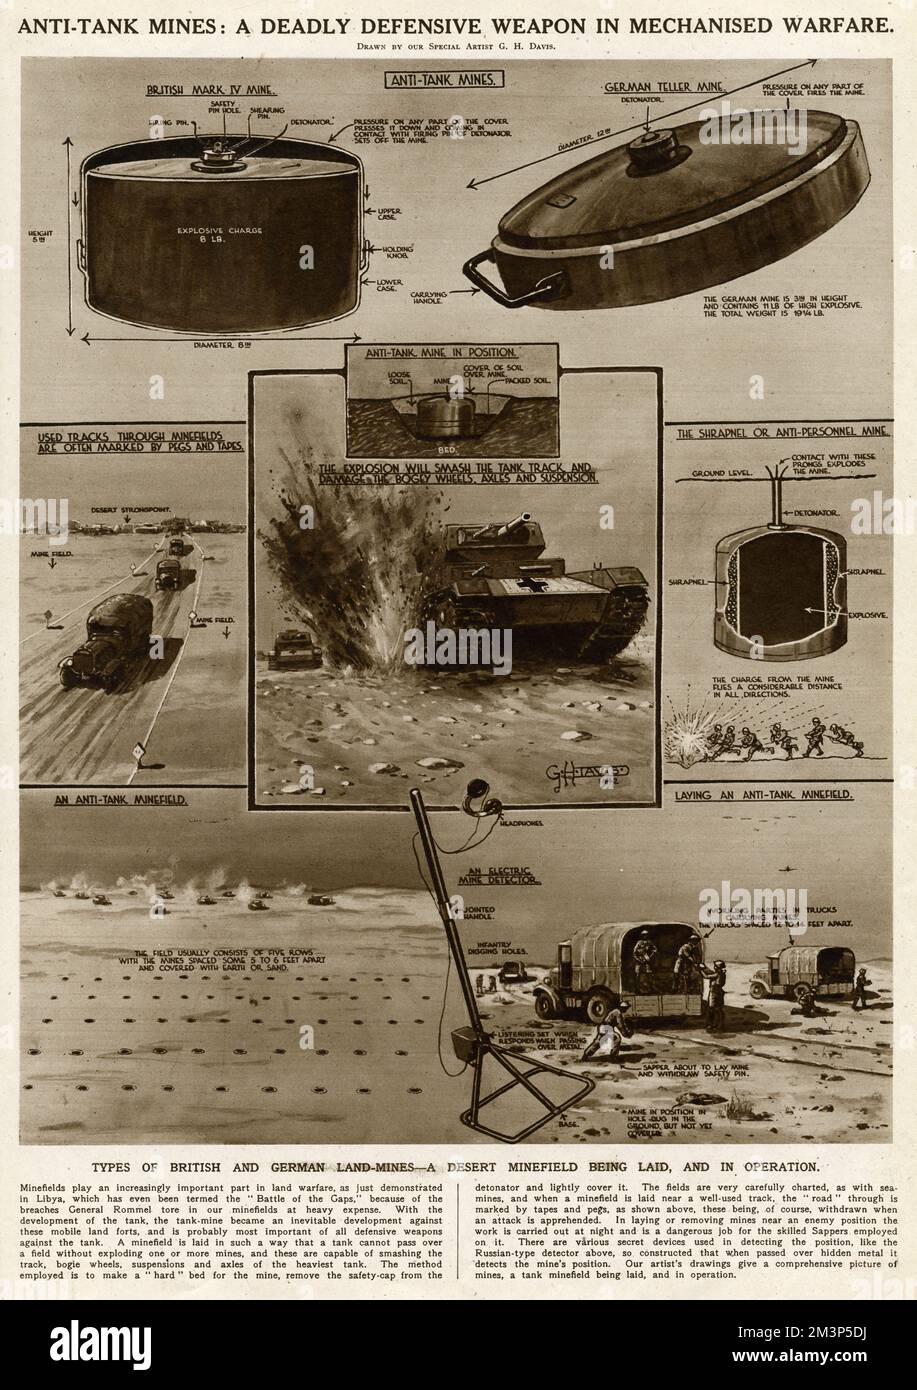 Anti-tank mines: a deadly defensive weapon in mechanised warfare during the Second World War.  Types of British and German land mines -- a desert minefield being laid, and in operation.      Date: 1942 Stock Photo